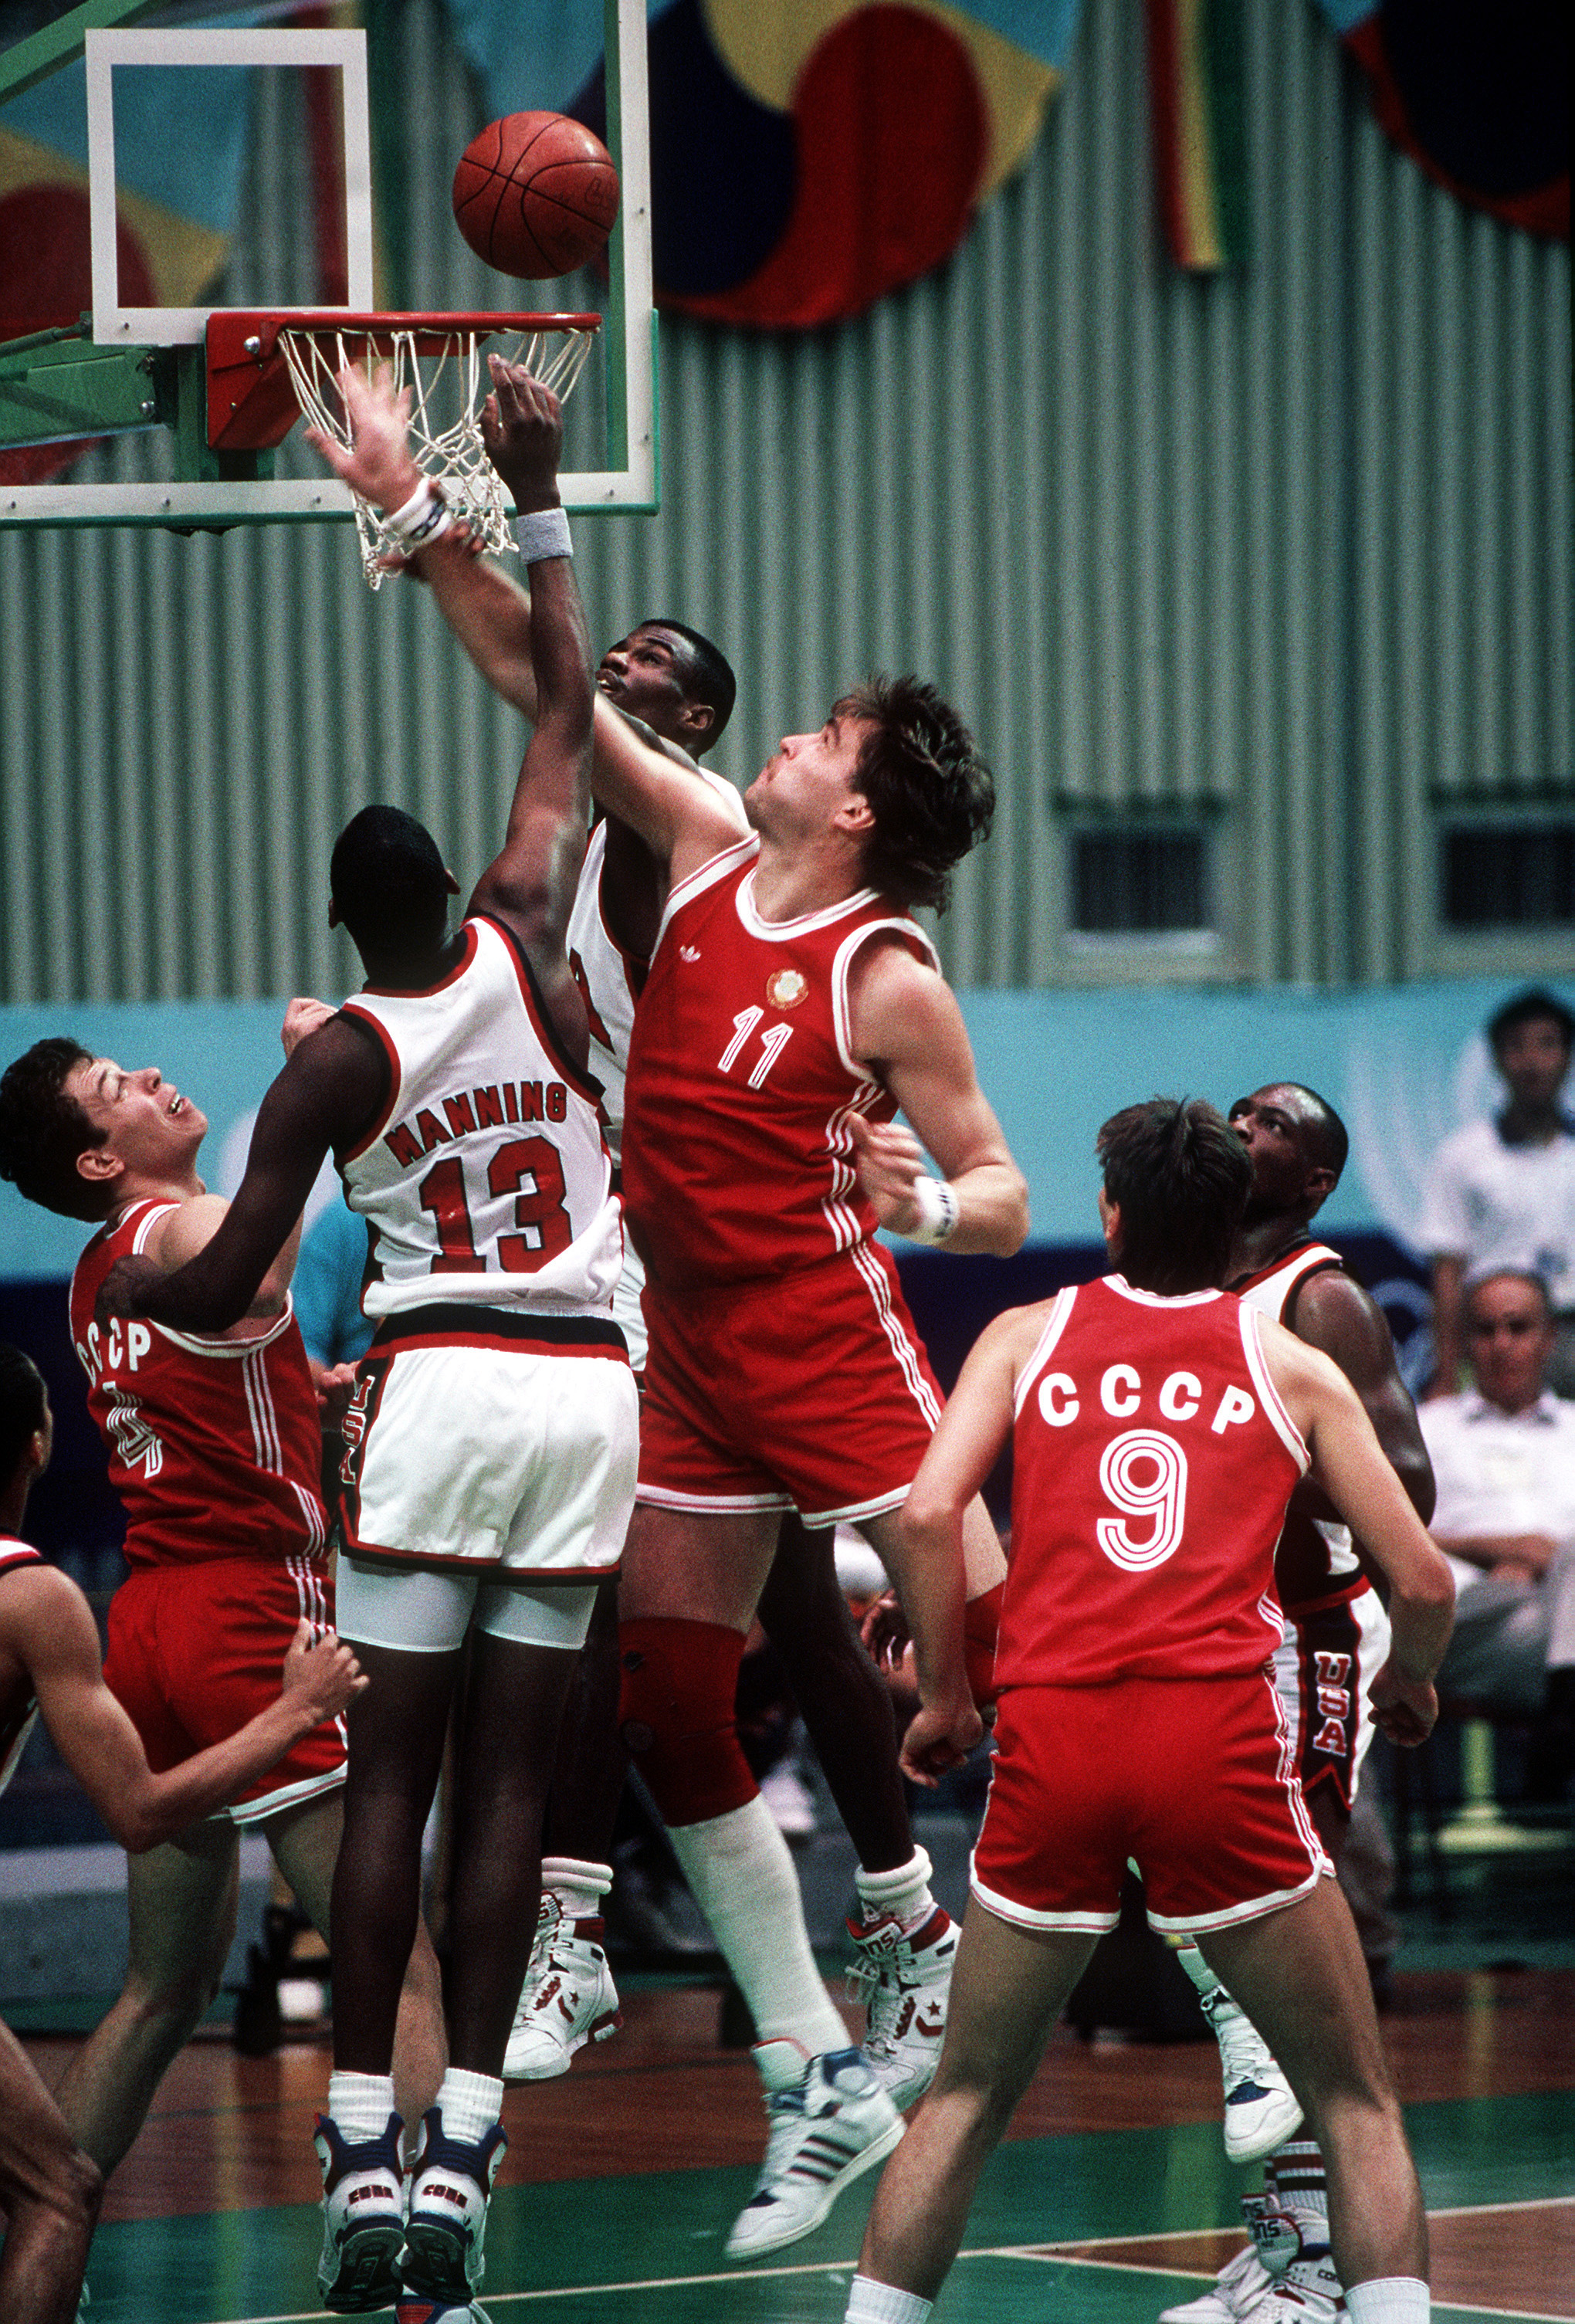 Danny Manning and the Navy's David Robinson battle a Soviet player for a rebound during the Soviet upset over the US basketball team at the XXIVth Olympiad.